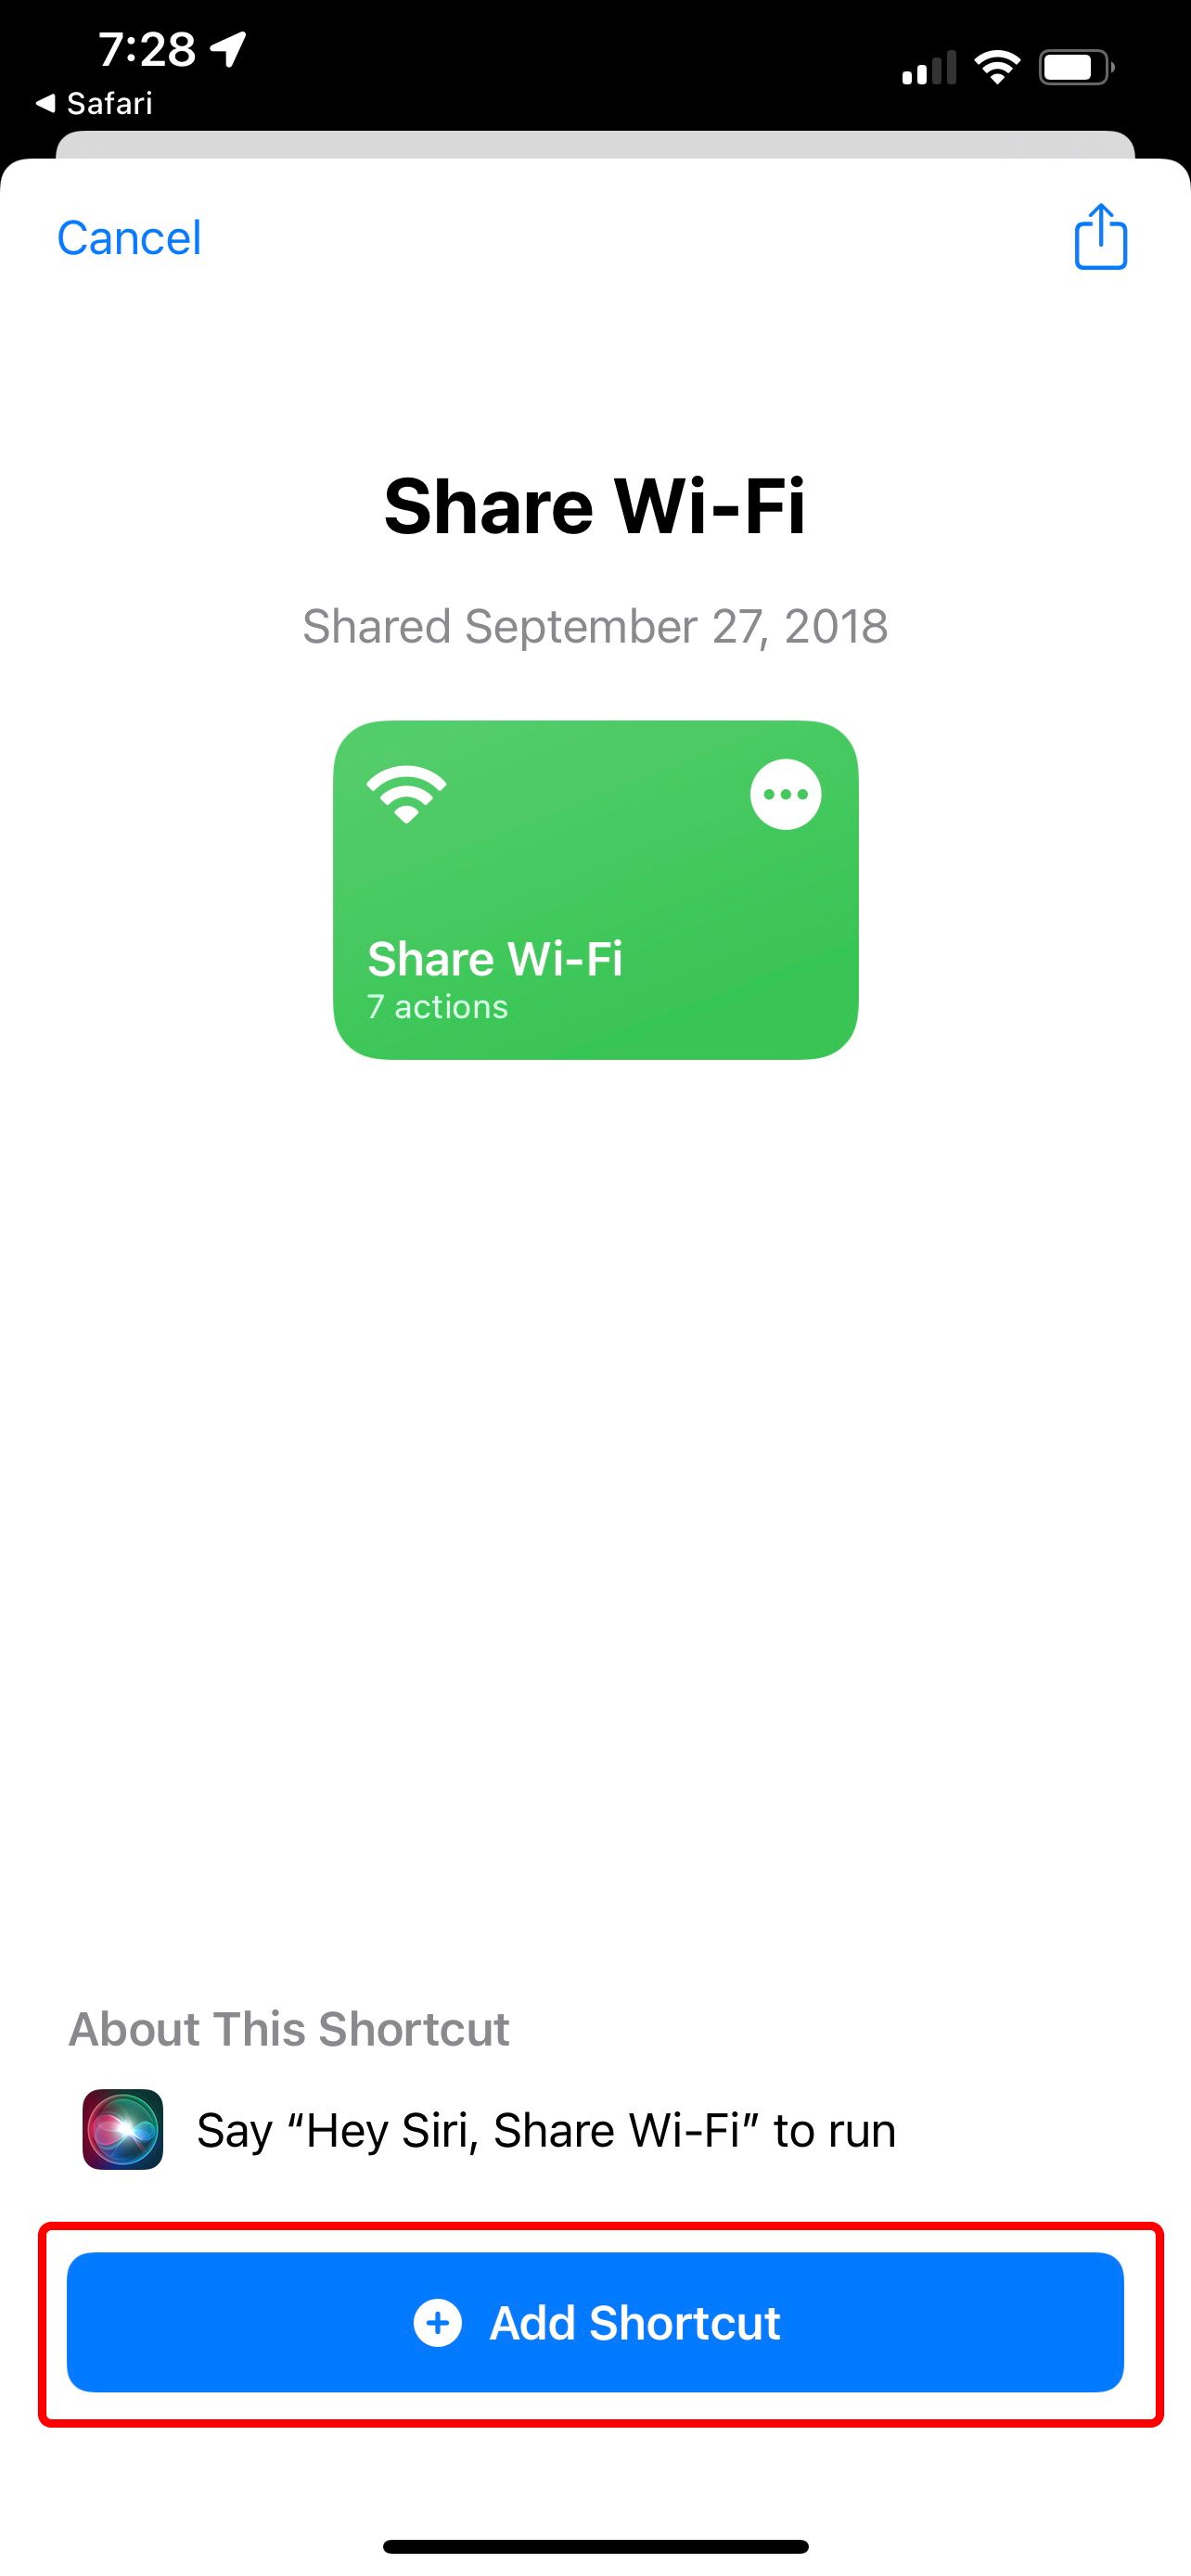 share wifi shortcut page with the add shortcut button highlighted